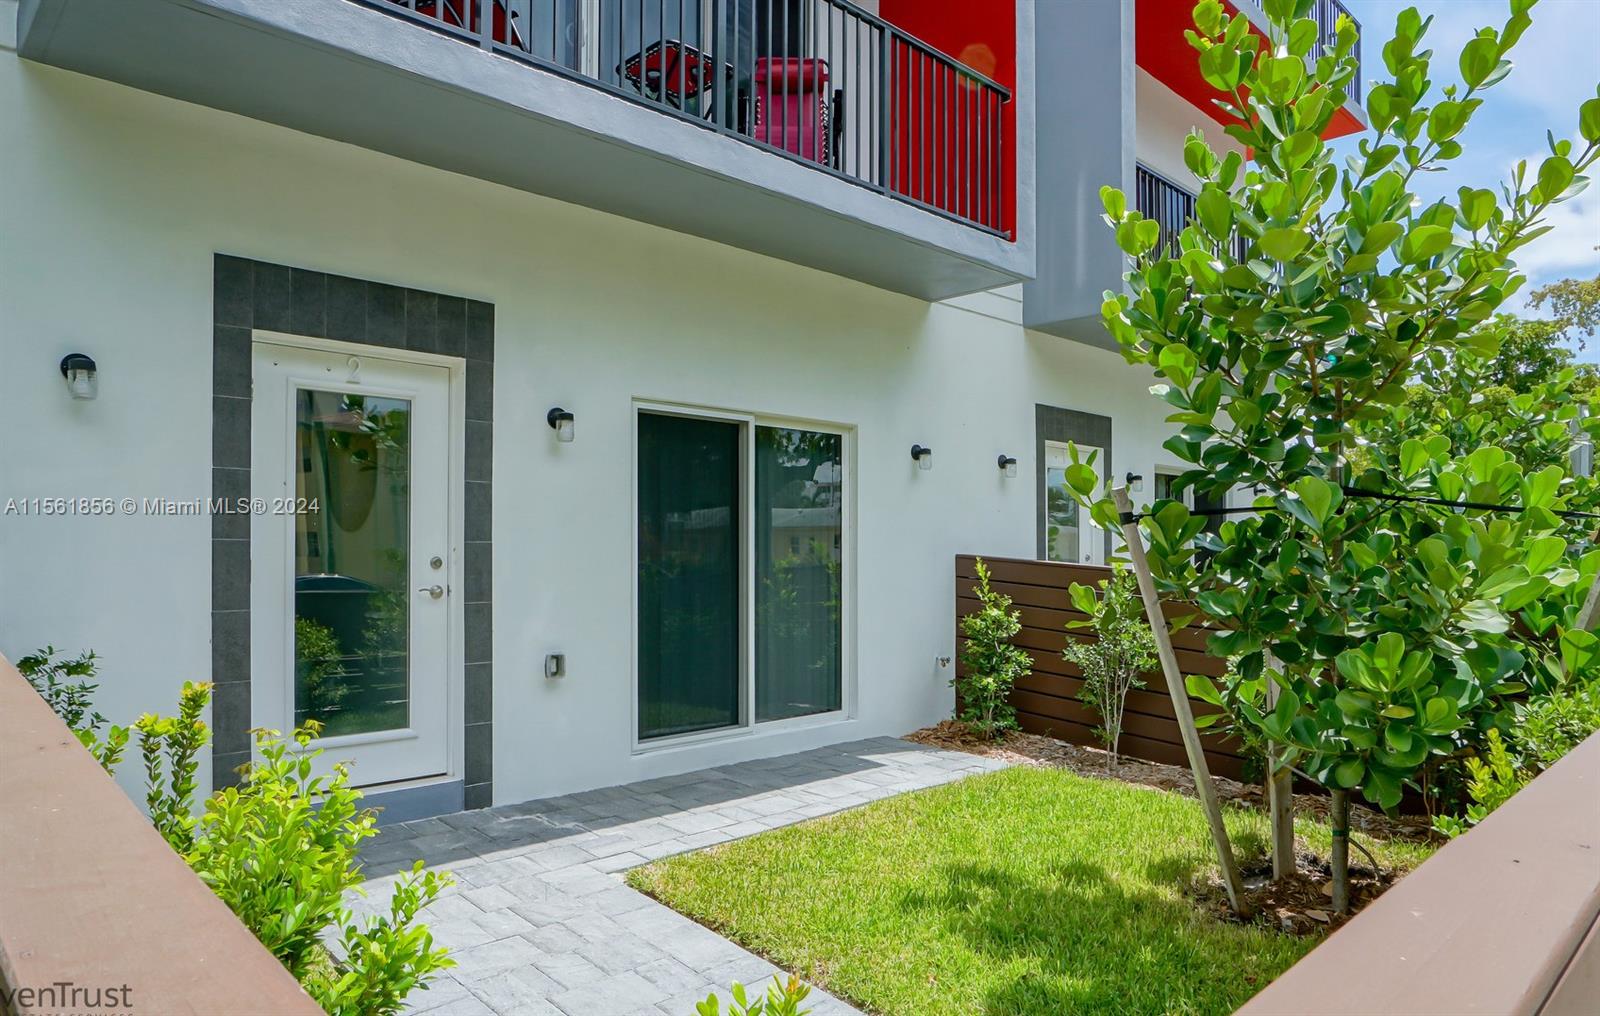 View Hollywood, FL 33020 townhome